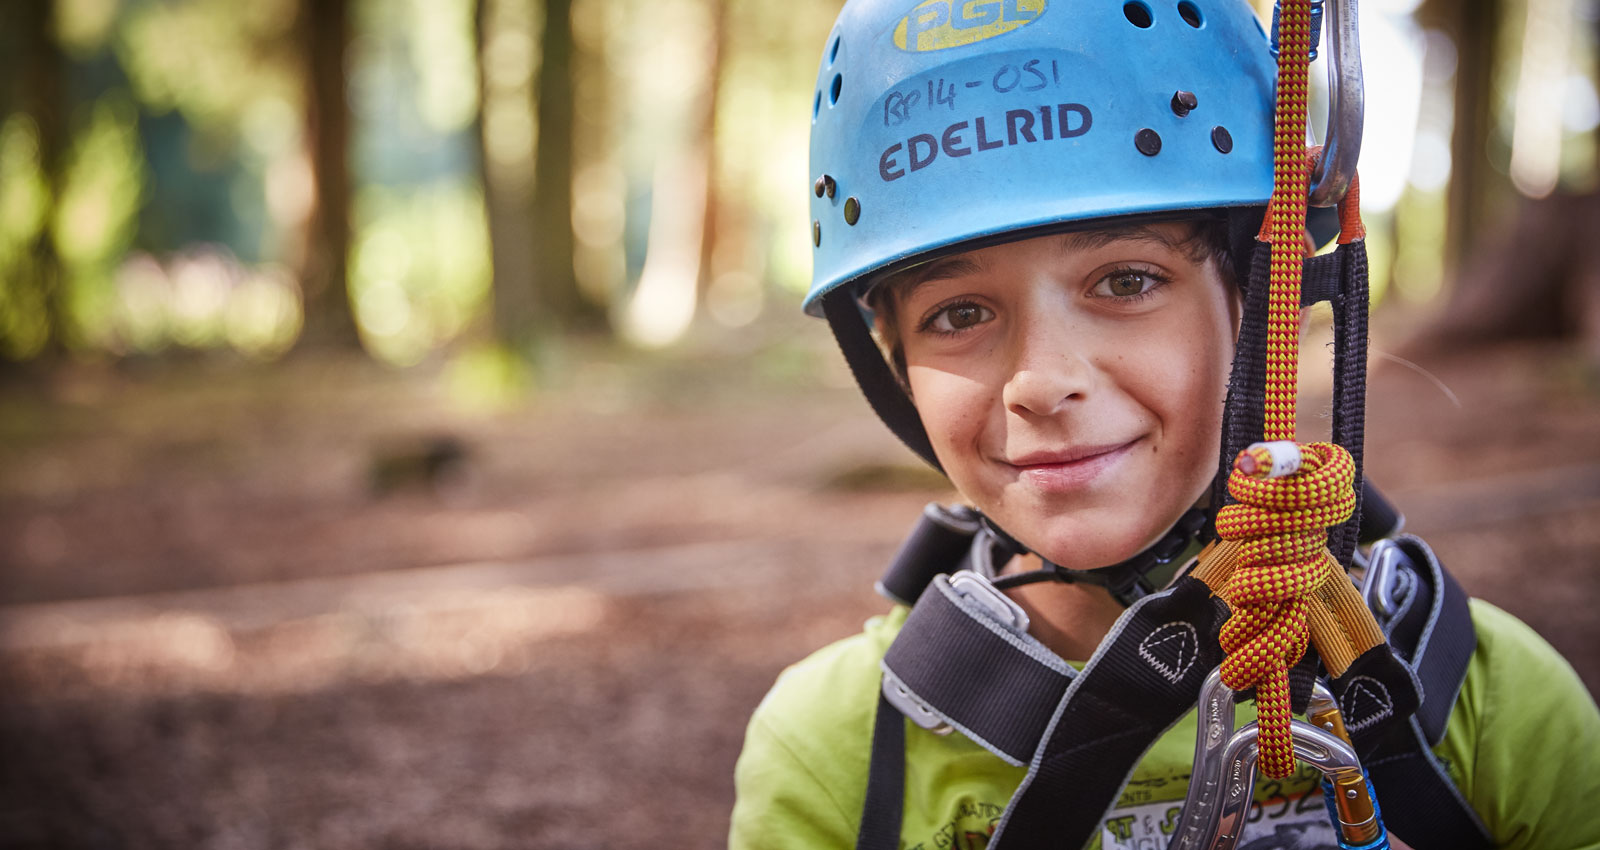 Adventure holidays and active summercamps for 7-17 year olds